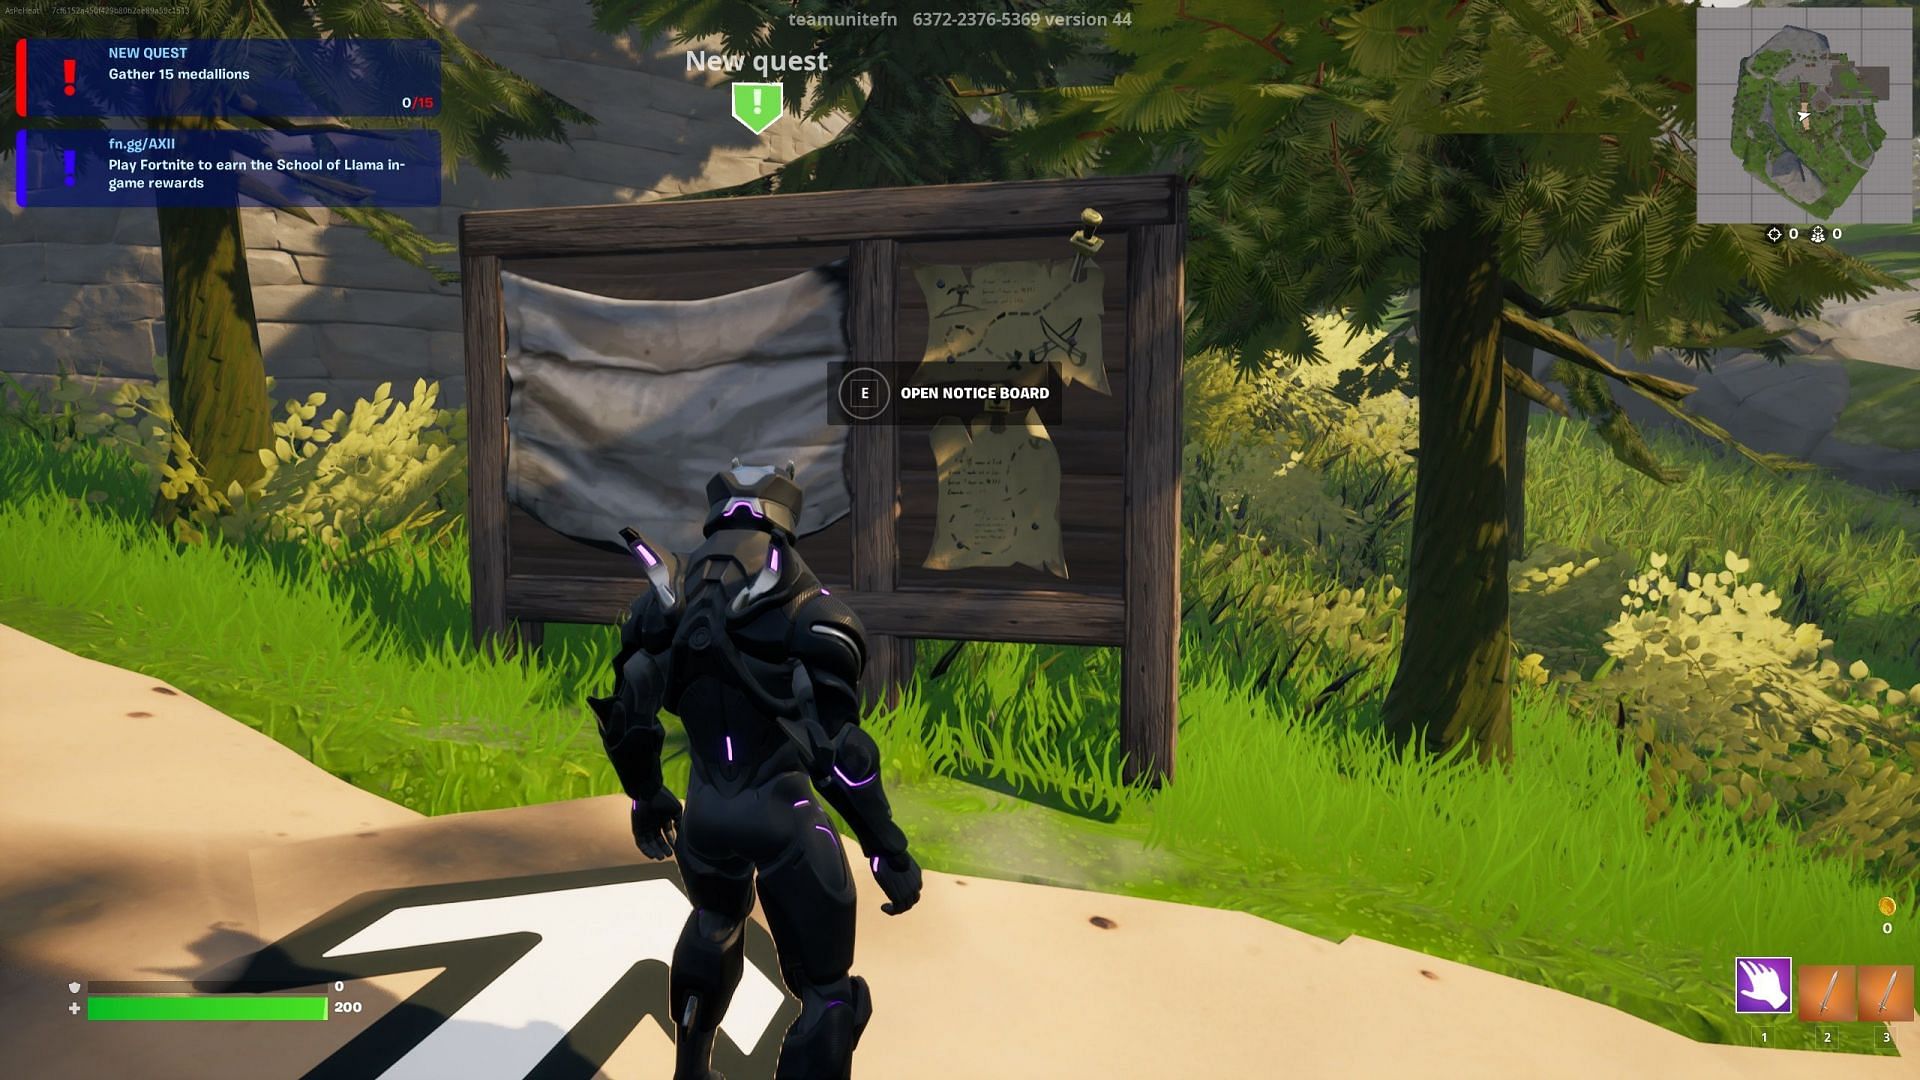 You need to interact with the notice board to start the challenge (Image via Epic Games)